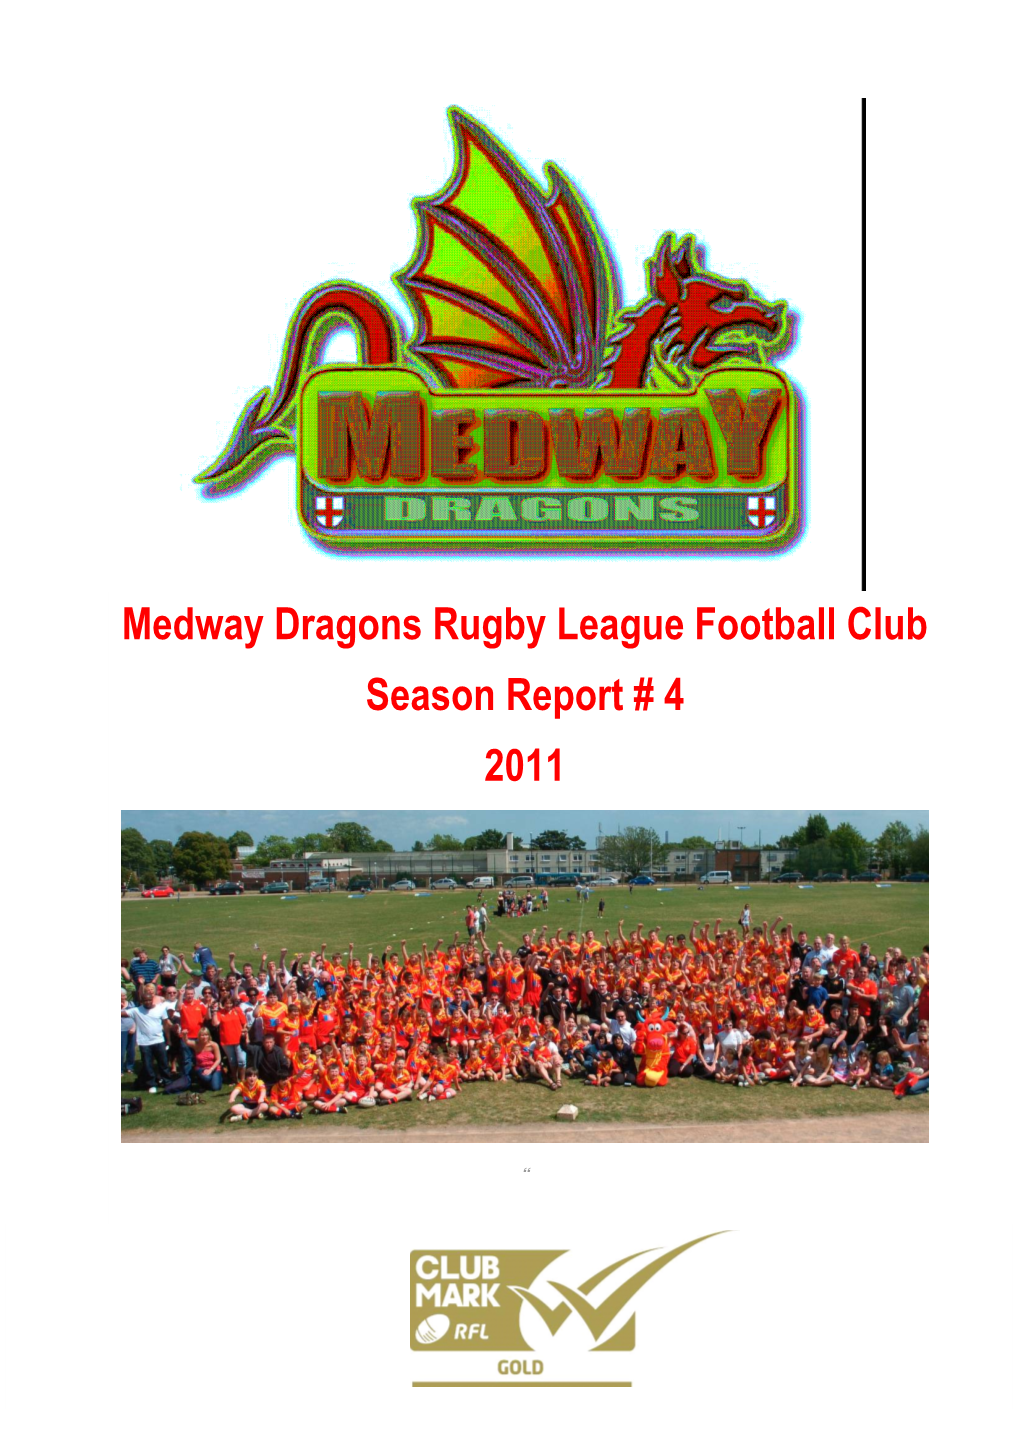 Medway Dragons Rugby League Football Club Season Report # 4